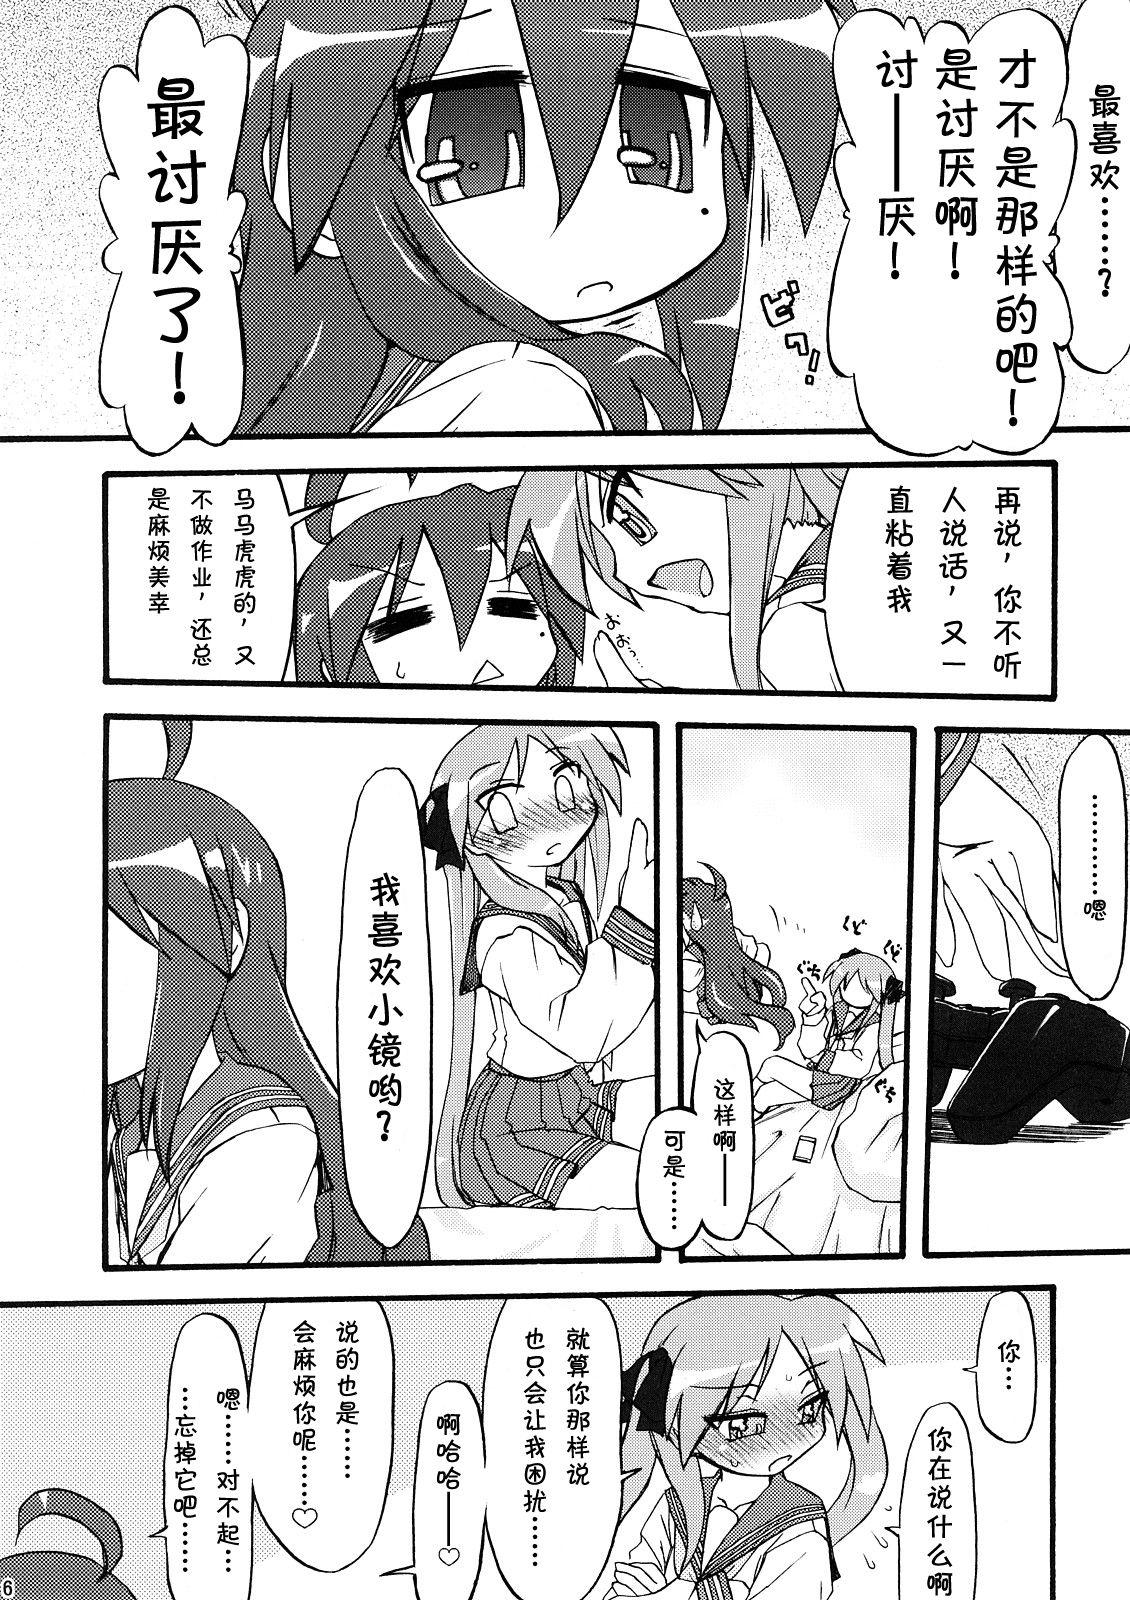 Woman Ao Sumire - Lucky star Stretch - Page 5